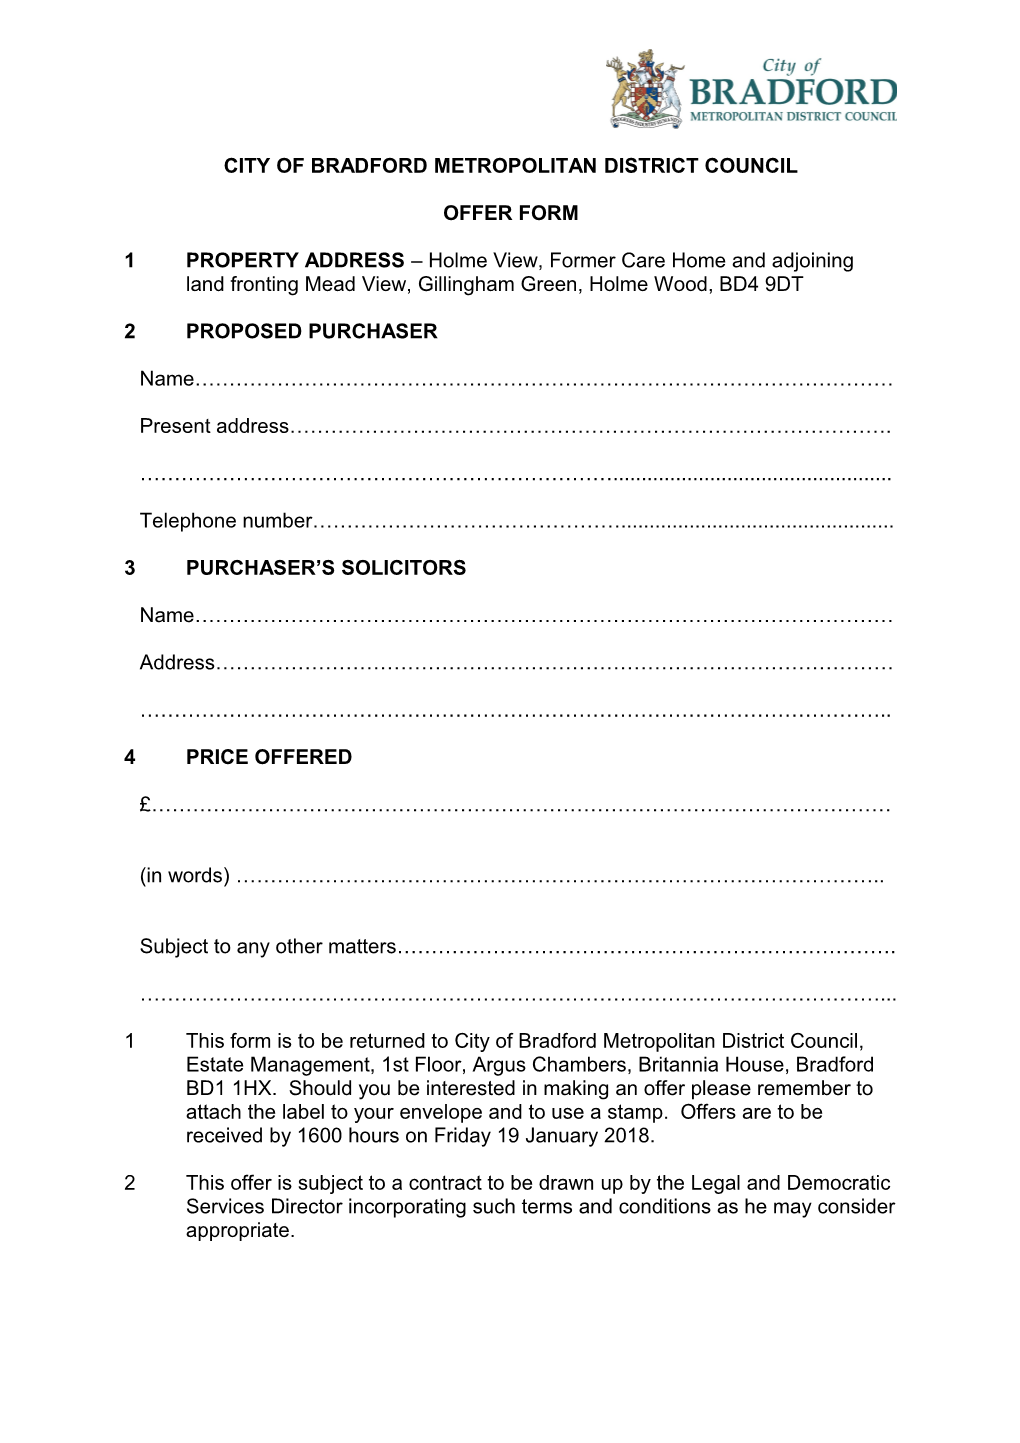 Holme View Offer Form